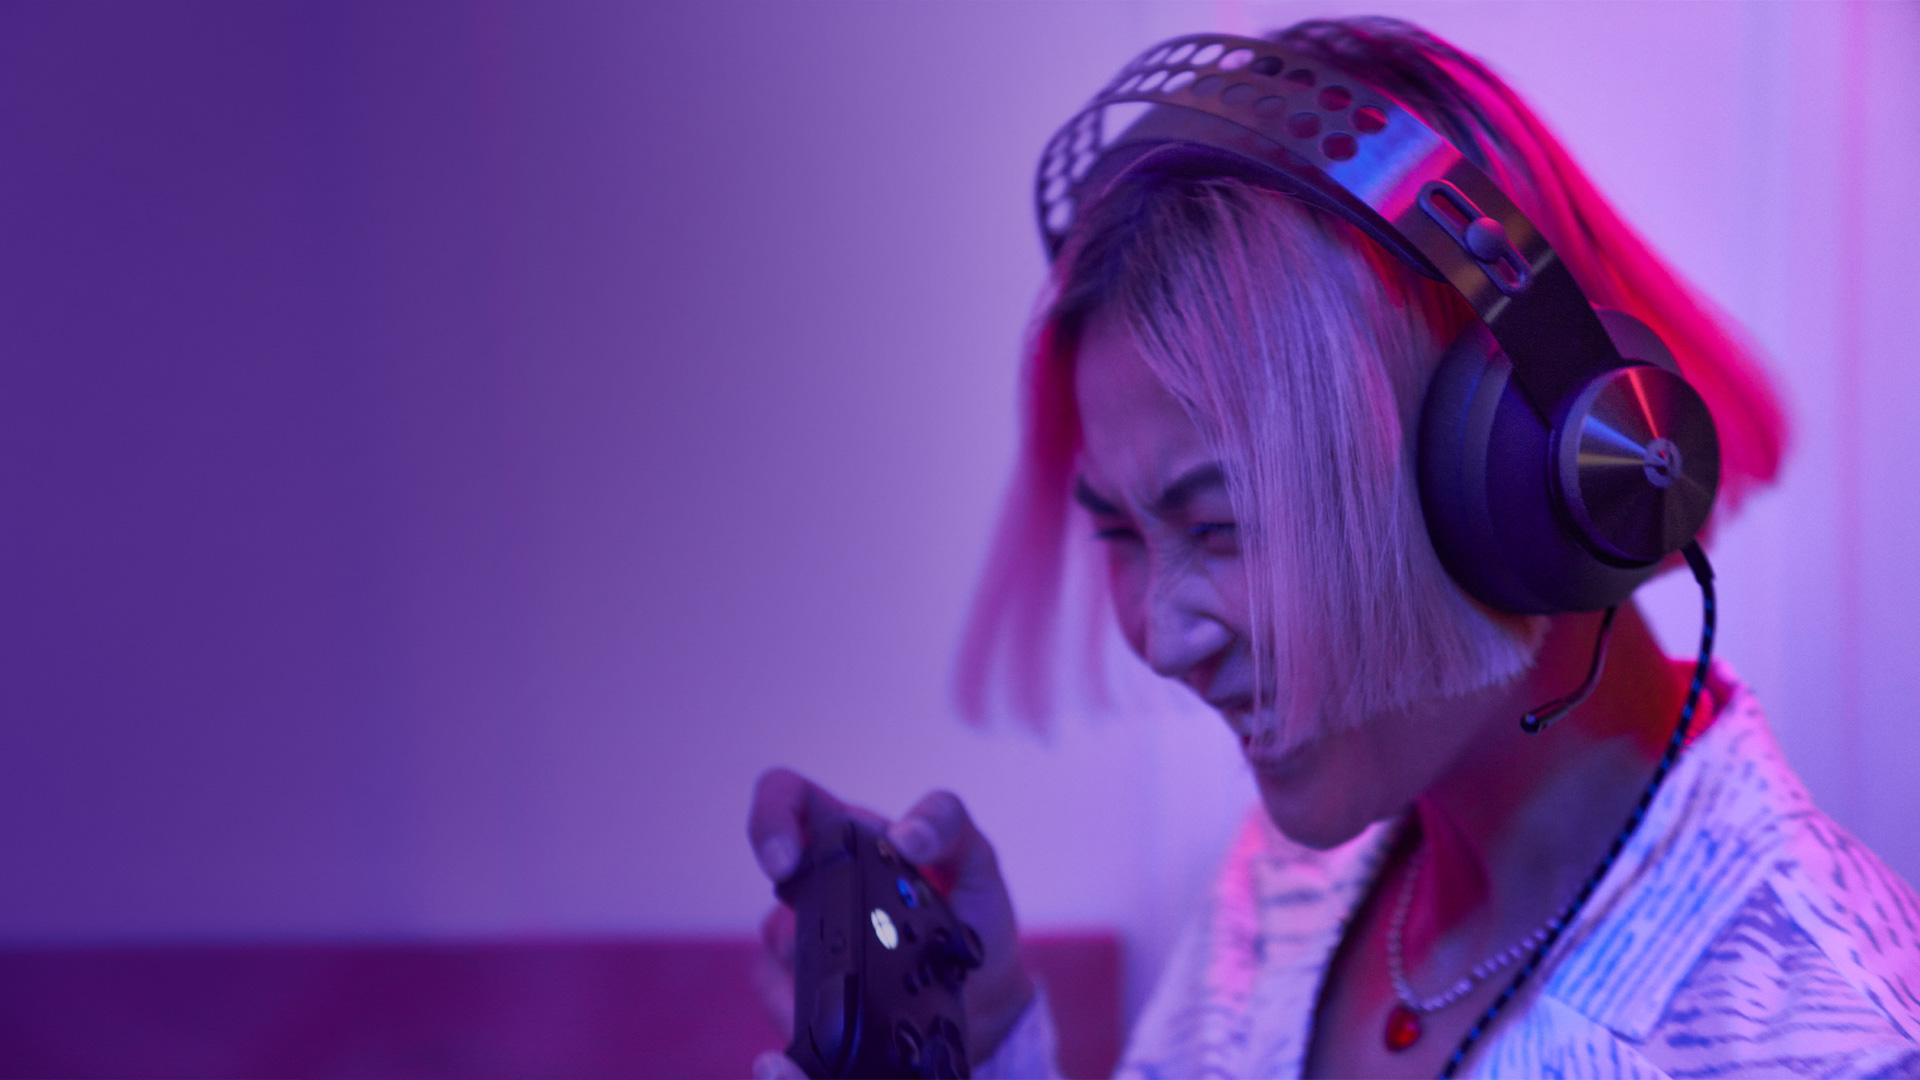 Woman wearing headphones and holding a gaming controller